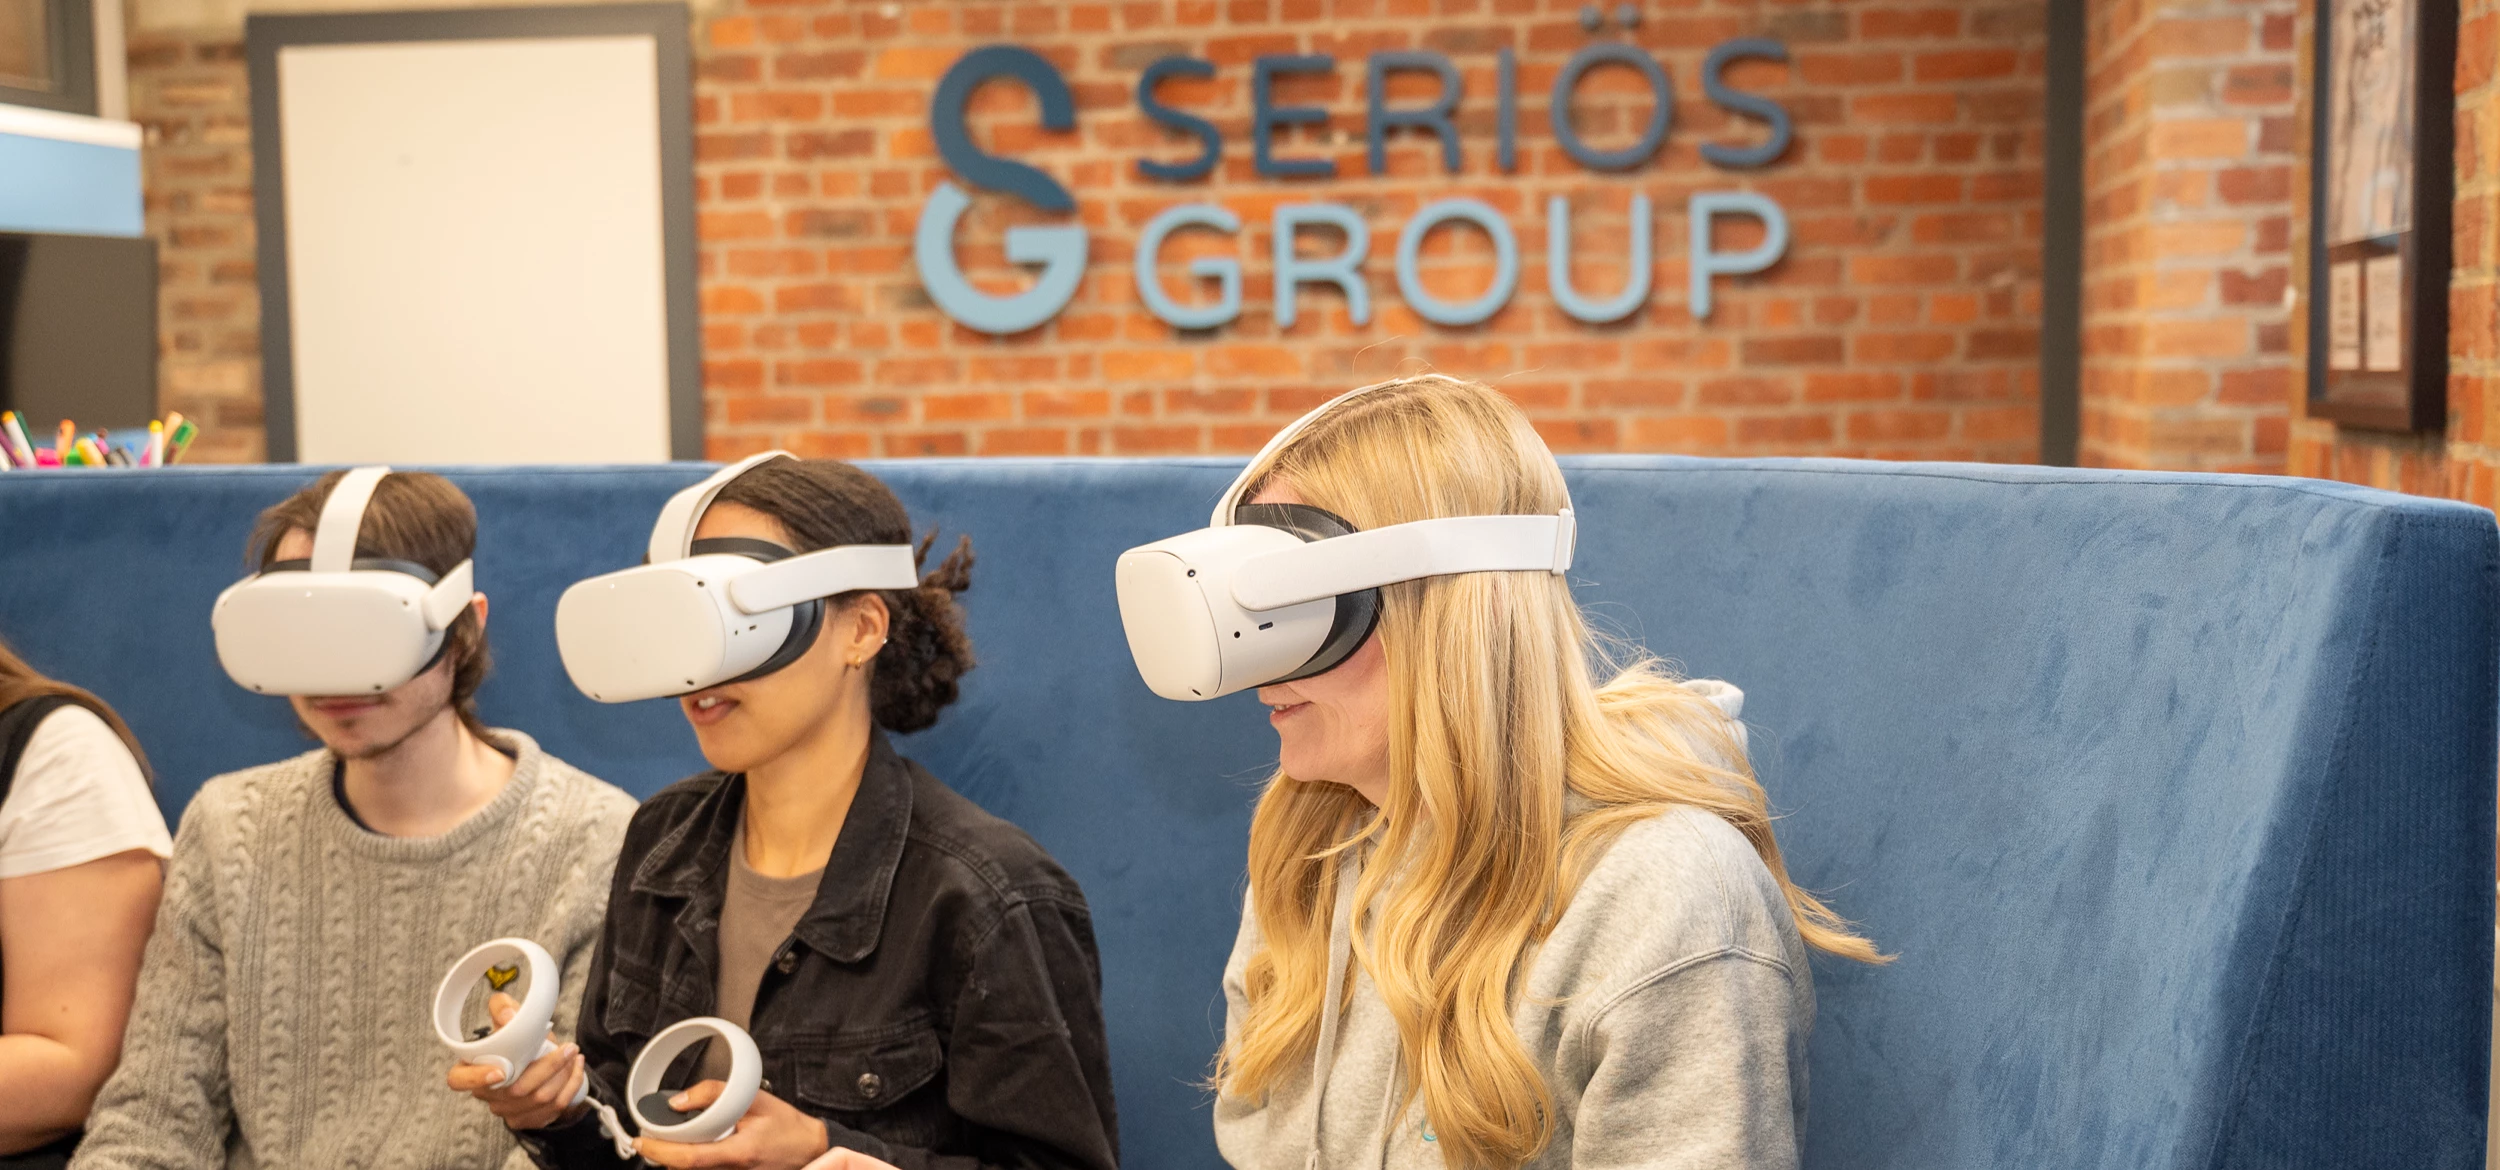 Members of the Seriös Group team using Meta-Quest headsets to hold a meeting in the Metaverse